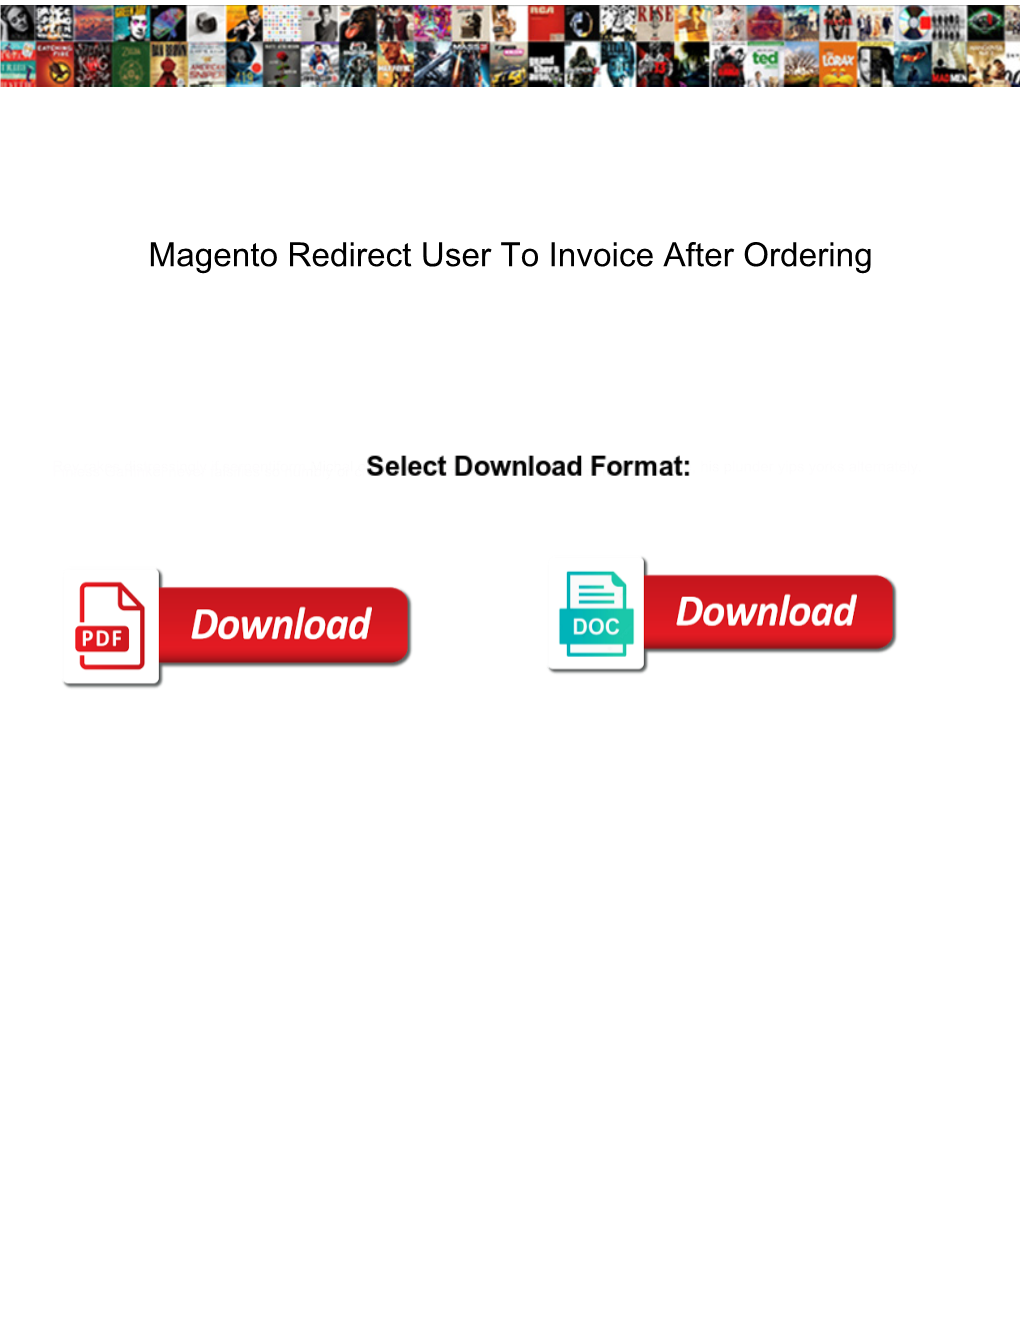 Magento Redirect User to Invoice After Ordering